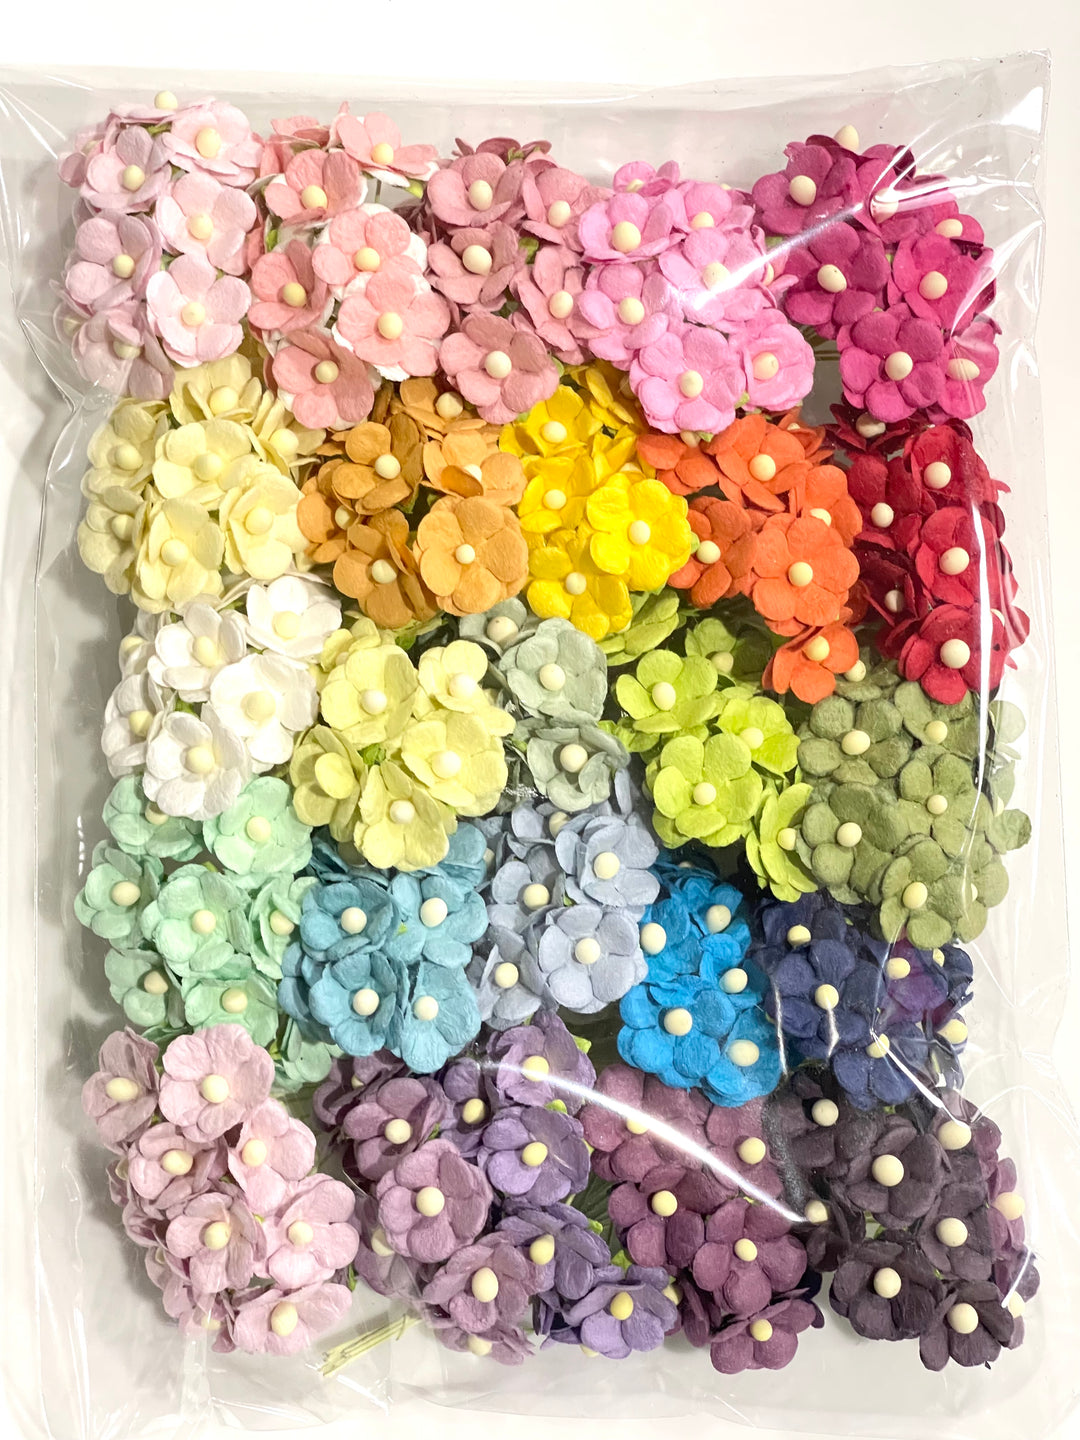 PREORDER Bulk 250 Sweetheart Blossoms Mulberry Paper Flowers - 250 Mixed Shades